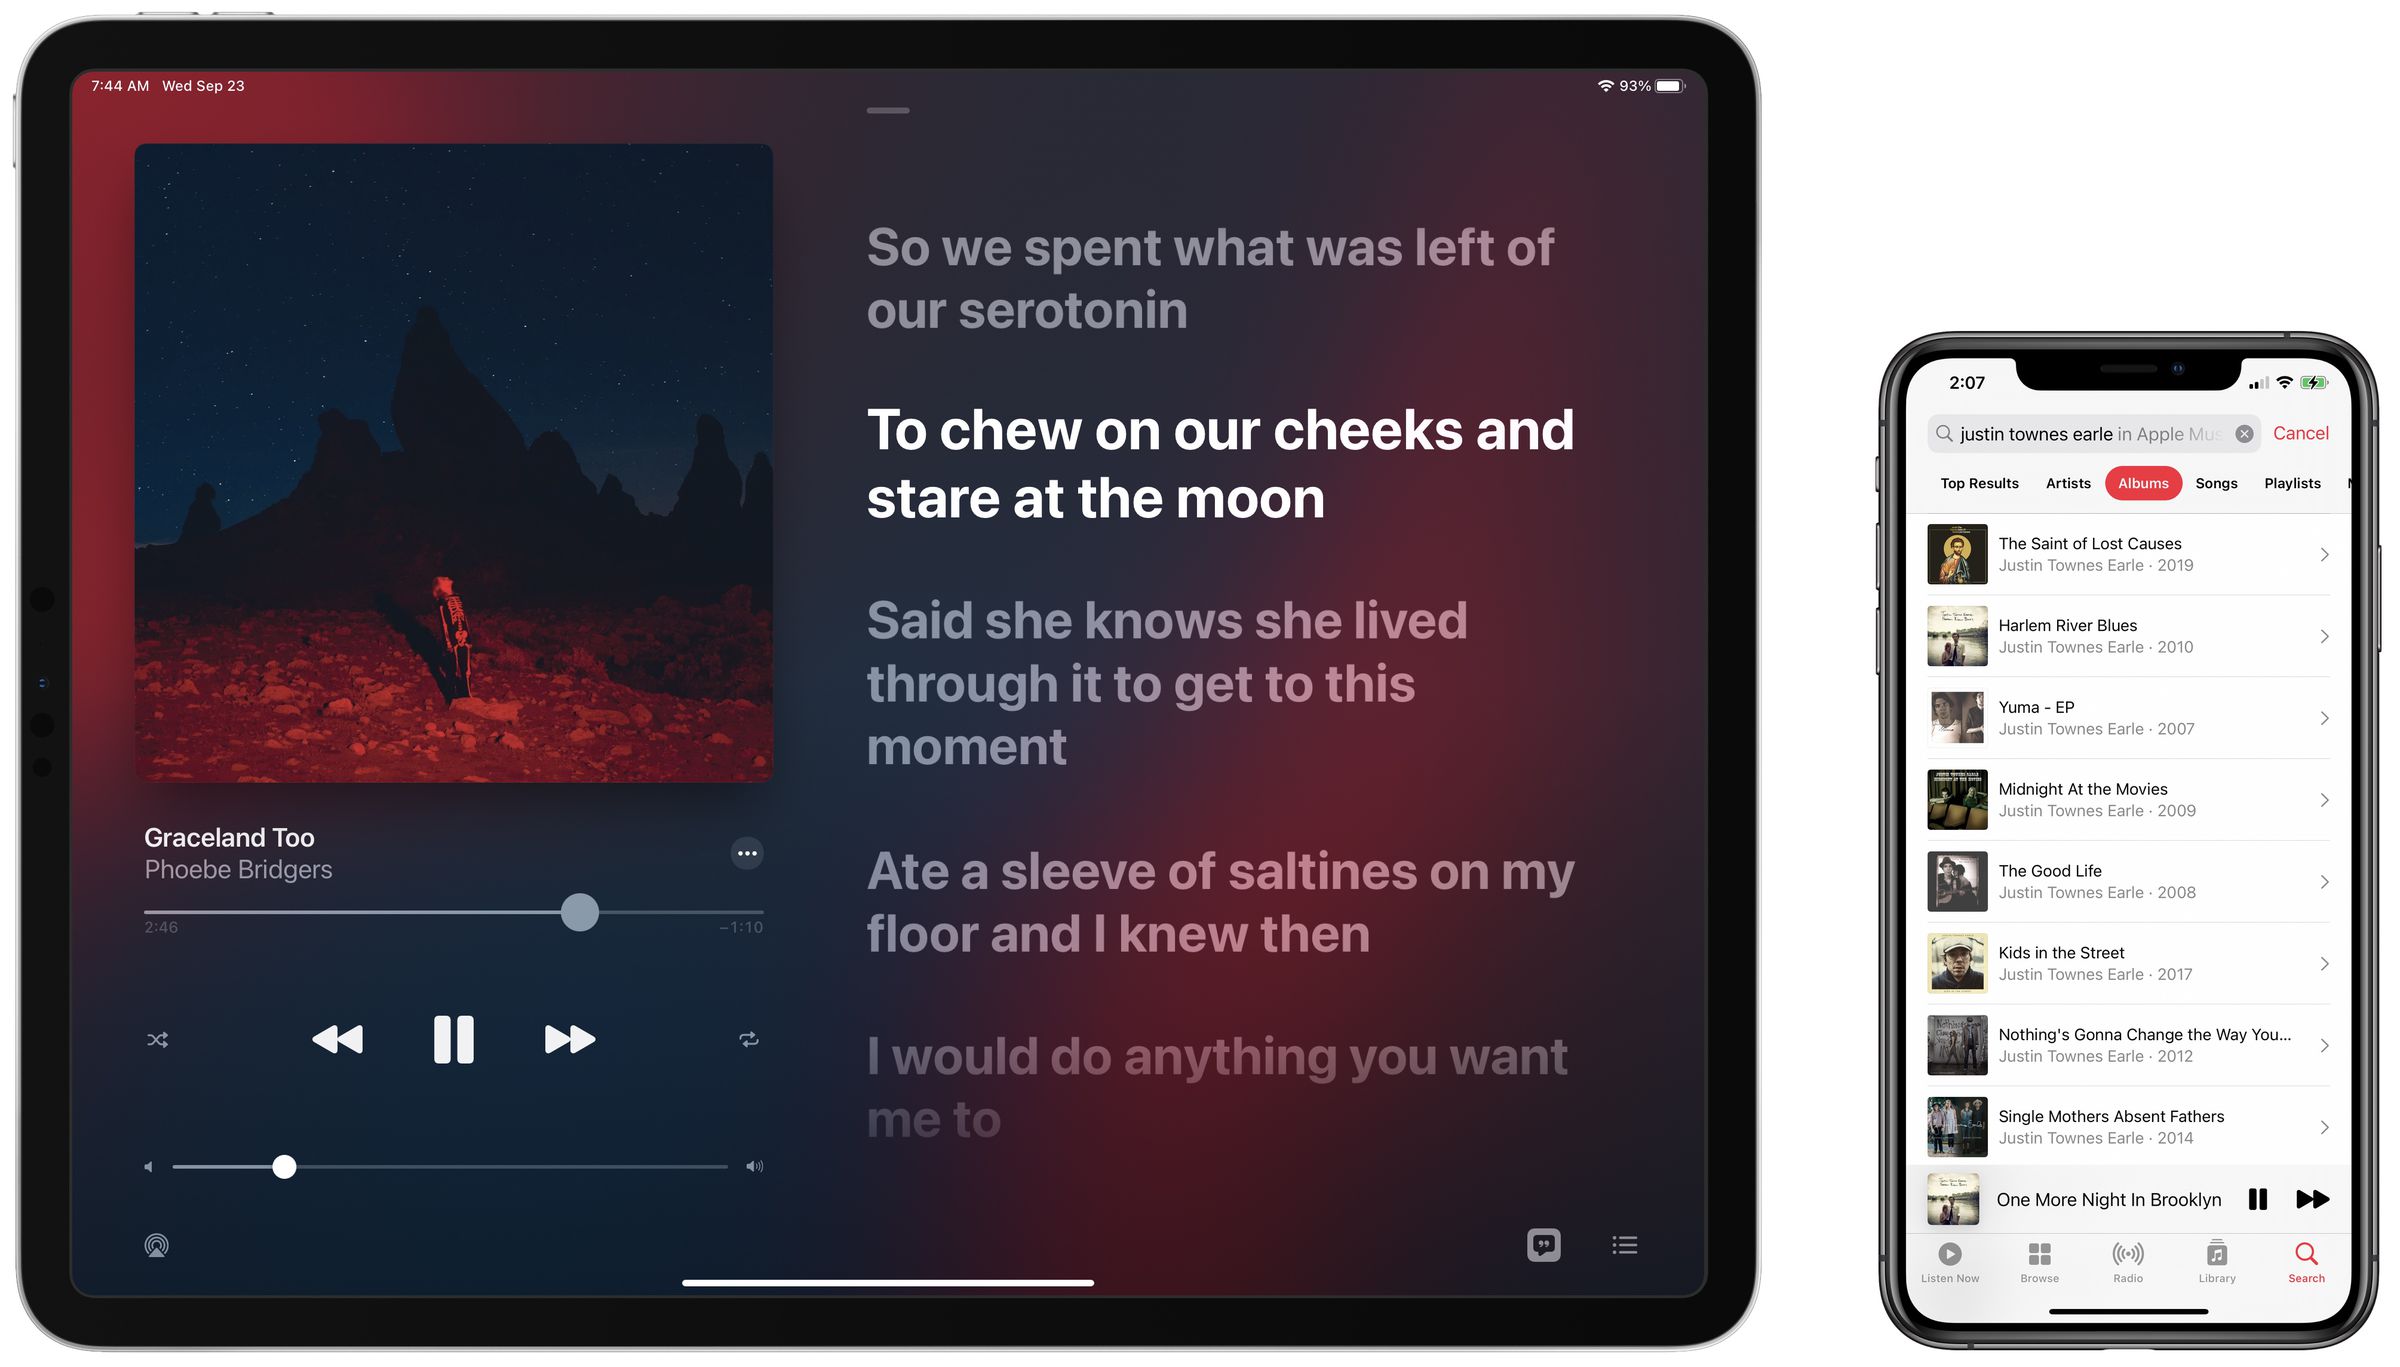 Apple Music can now show full-screen lyrics, and search is more useful.